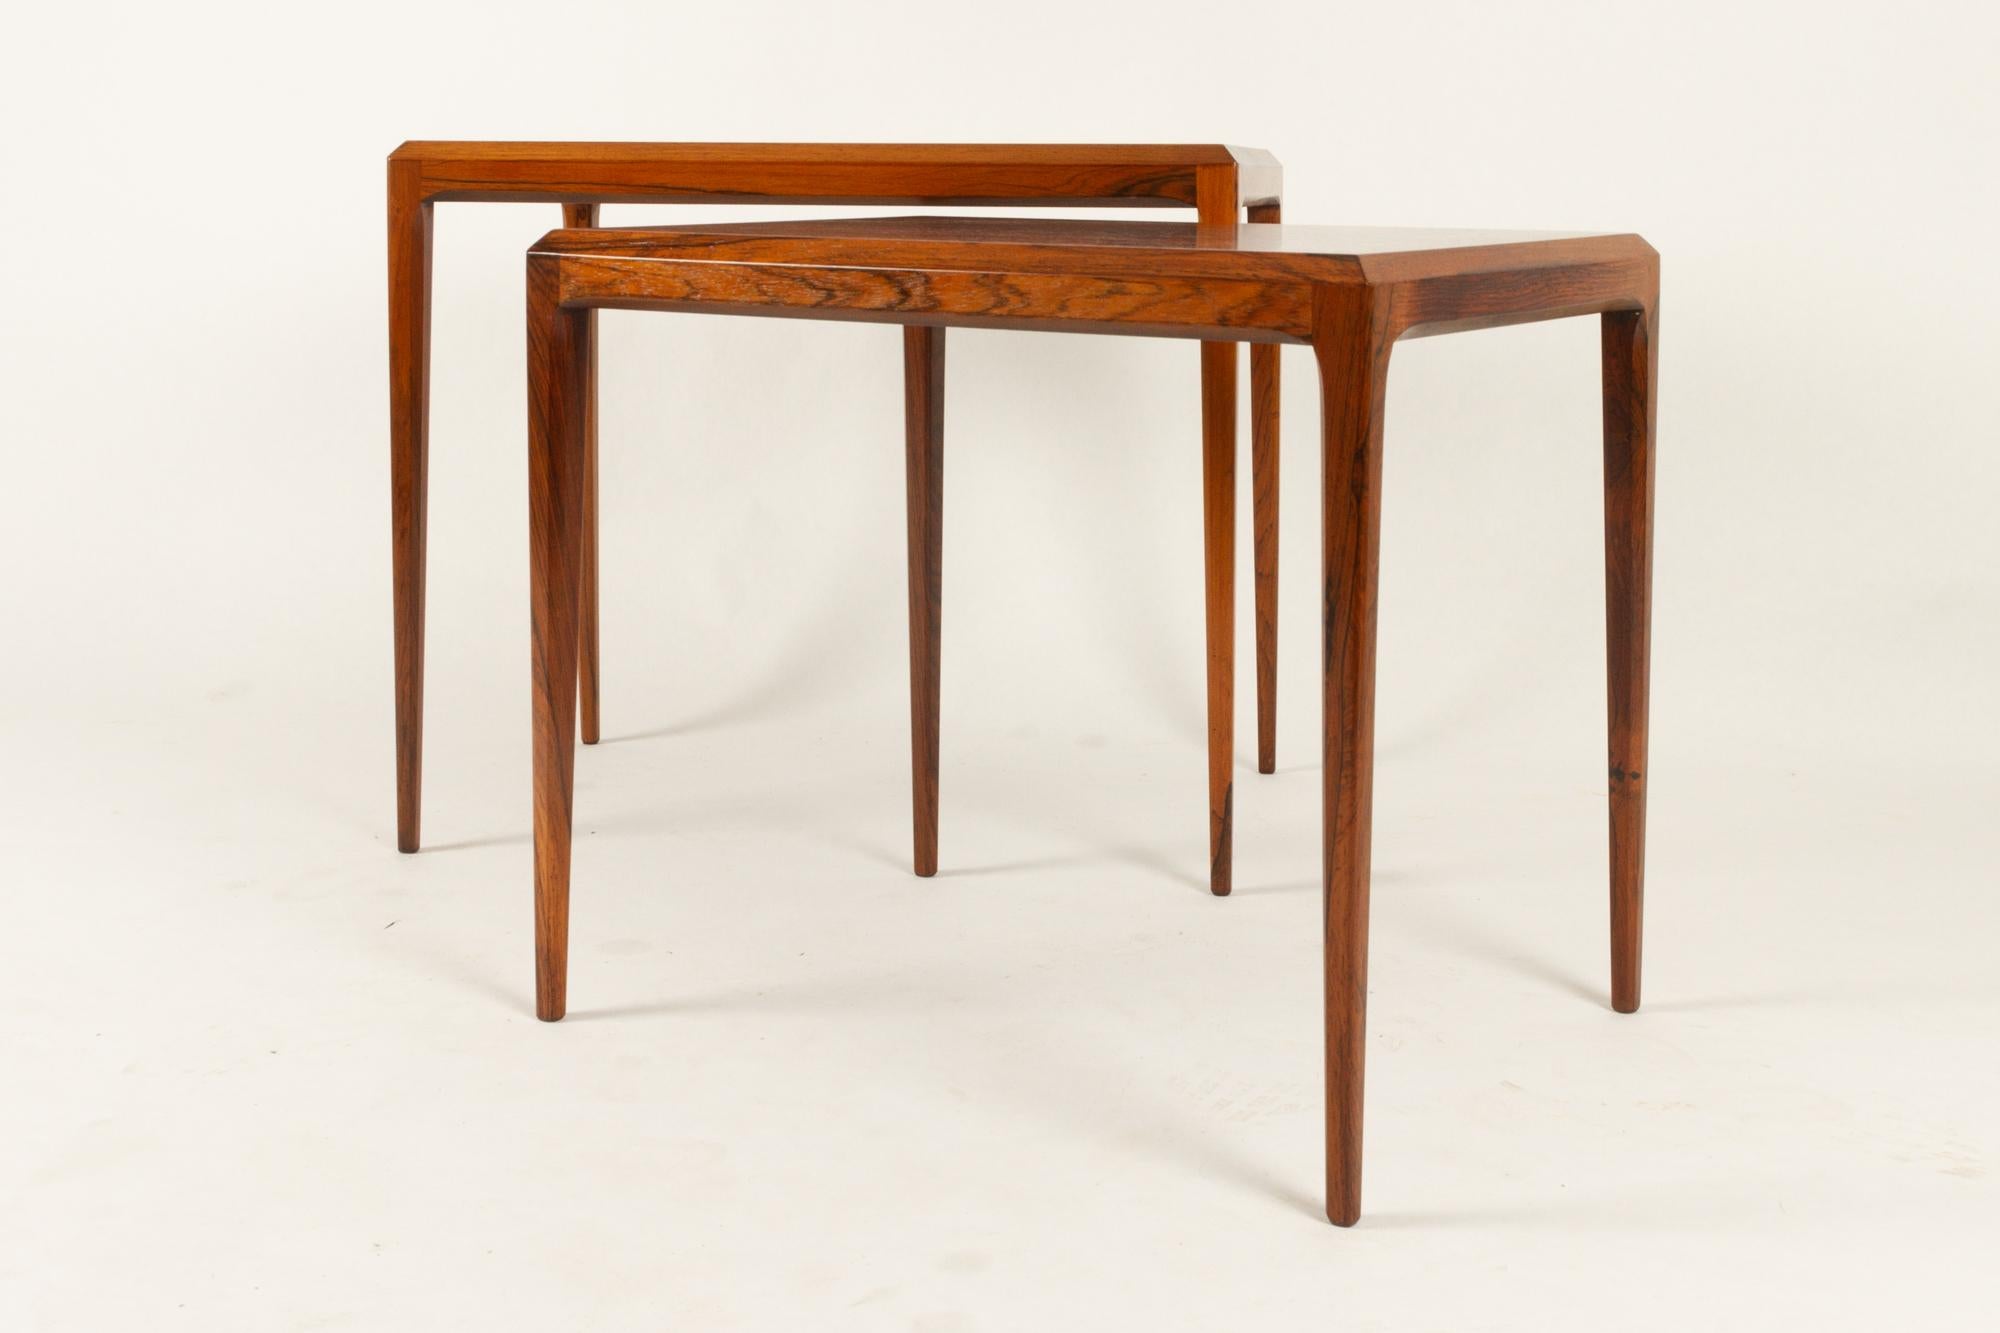 Johannes Andersen nesting tables by CFC Silkeborg Denmark, 1960s.
Set of two Danish Mid-Century Modern rosewood nesting tables. Tapered edges and legs in the Classic style of Johannes Andersen. 
Very good condition. Cleaned and polished. Ready for